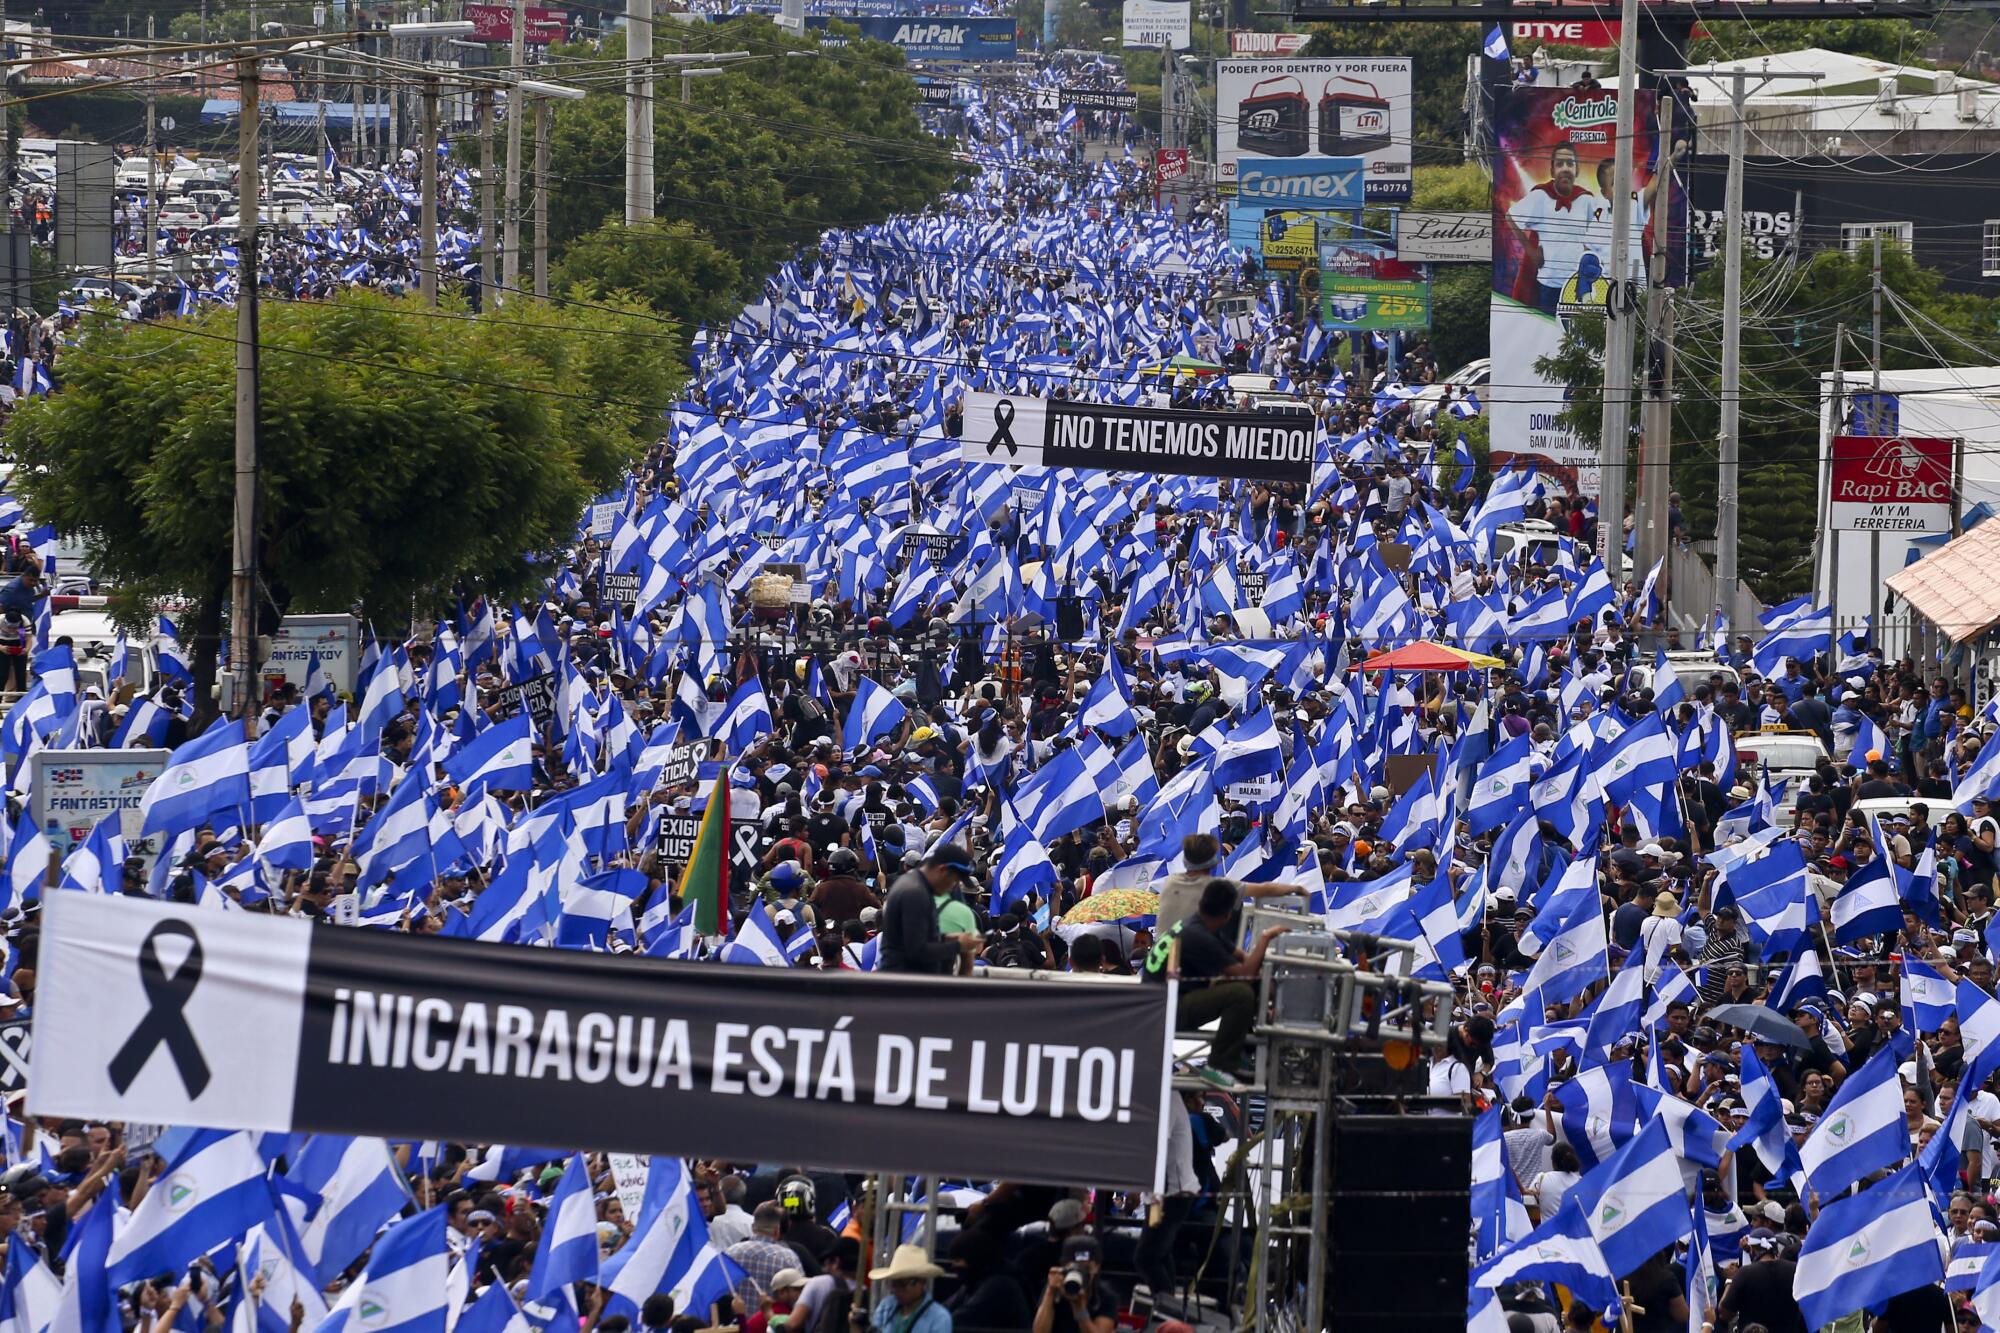 Tens of thousands march on Nicaragua's Mother's Day against President Daniel Ortega in Managua, Nicaragua, on May 30, 2018. At least 17 people were killed during this demonstration and others around the country that day.